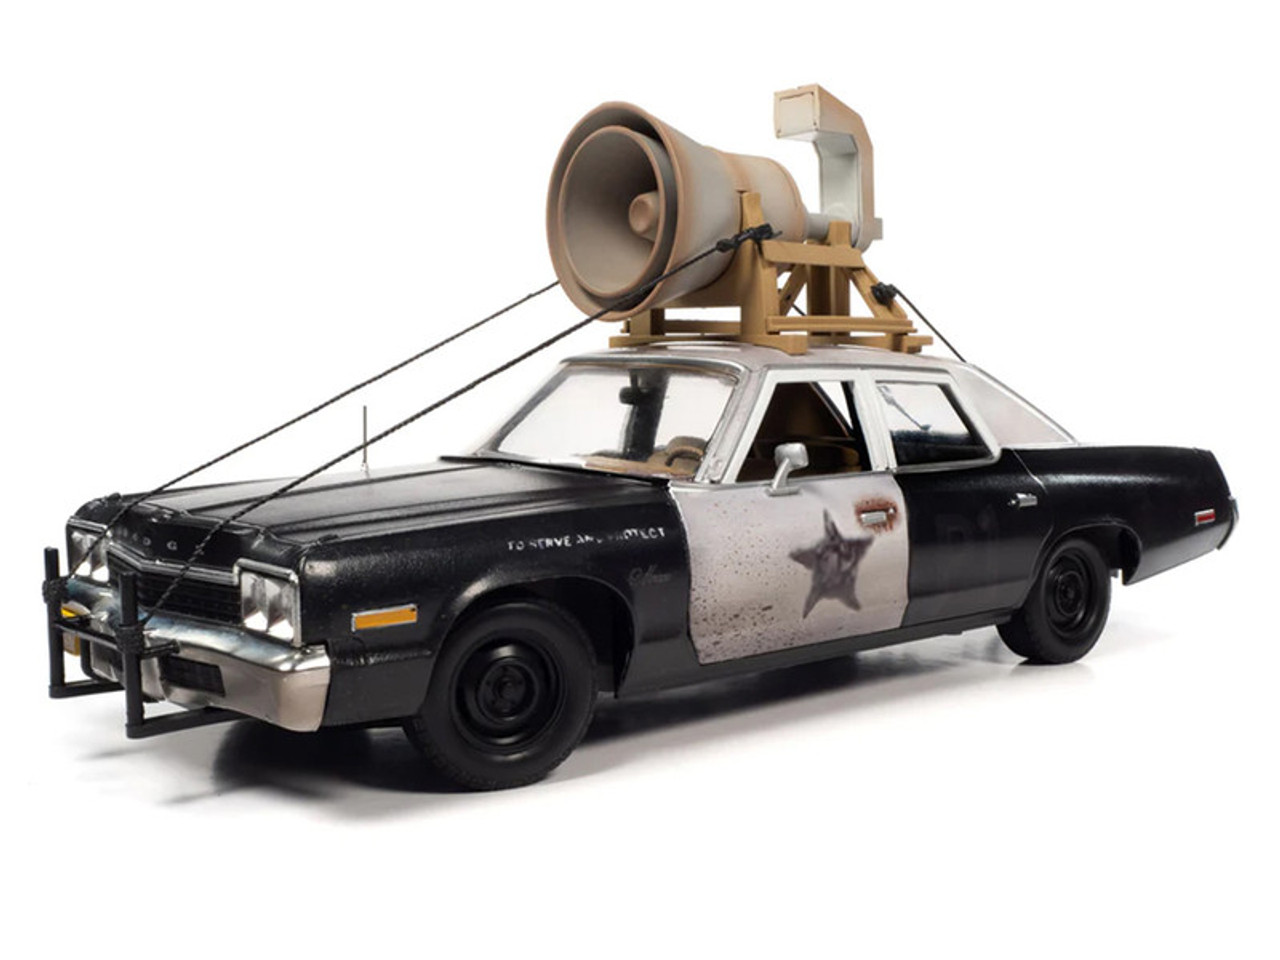 1/18 Auto World 1974 Dodge Monaco "Bluesmobile" with Loud Speaker Black and White (Dirty) with Jake and Elwood Blues Figures "The Blues Brothers" (1980) Movie Diecast Car Model